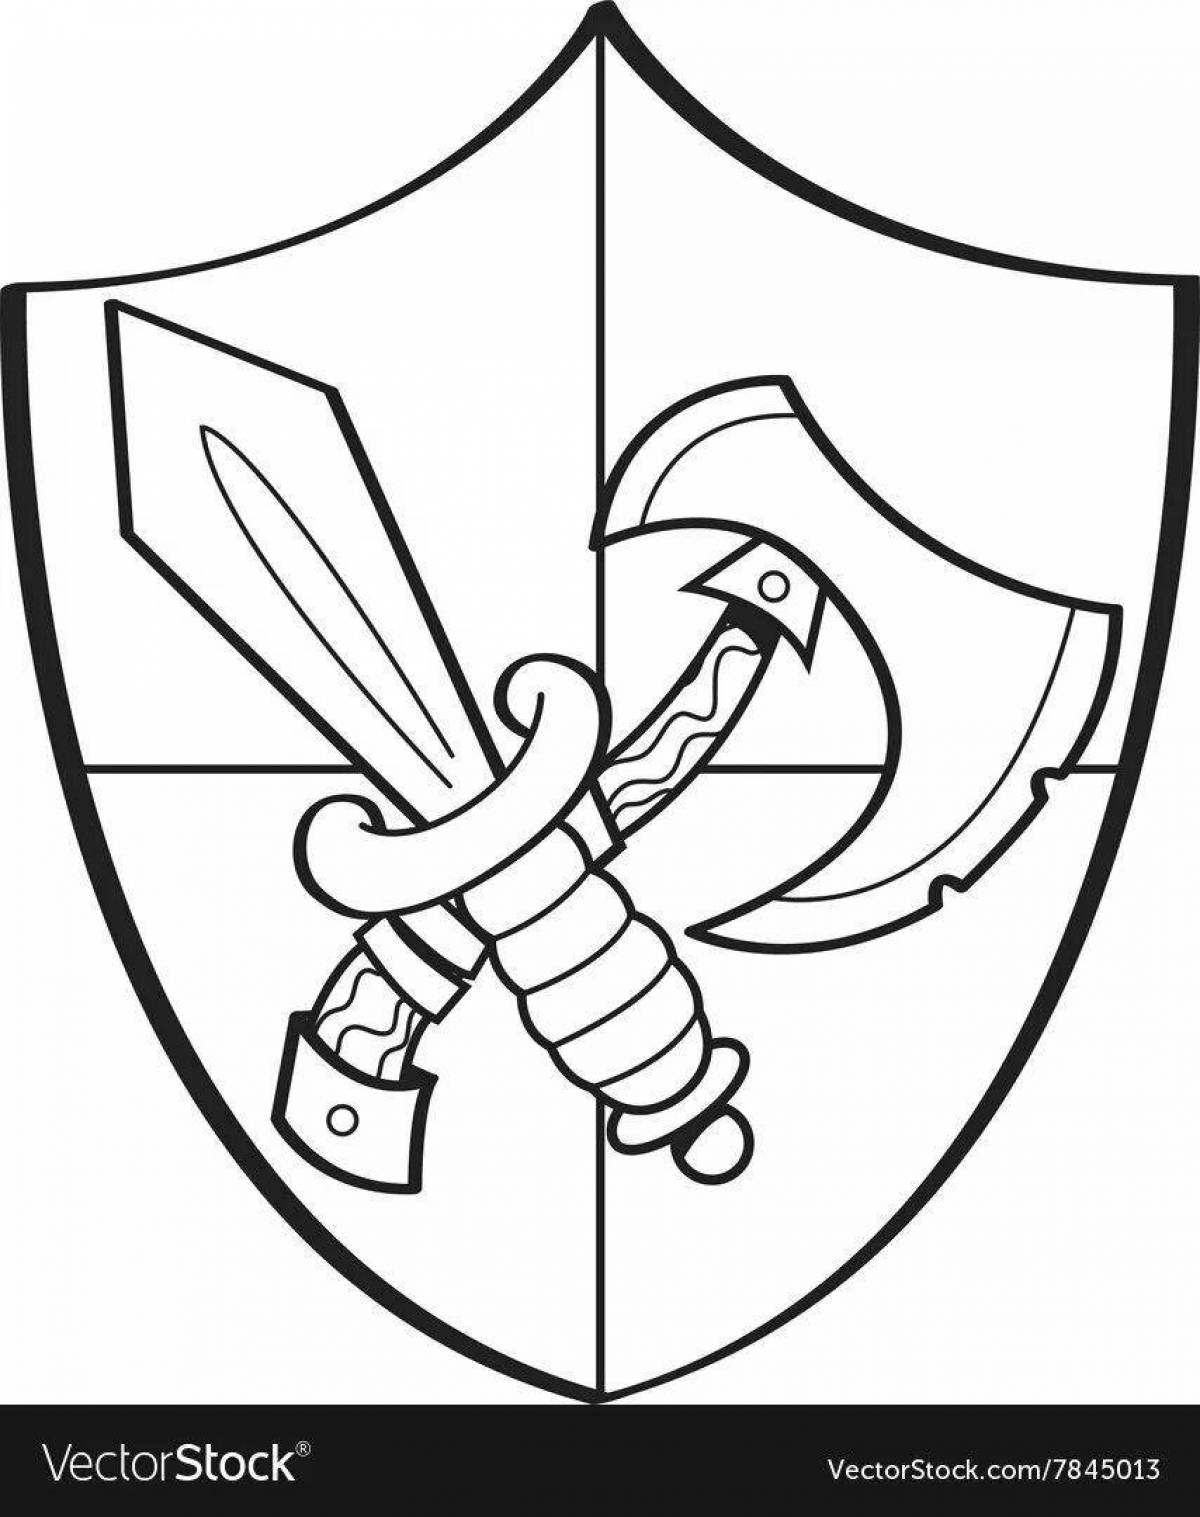 Shiny Hero Shield Coloring Page for Babies